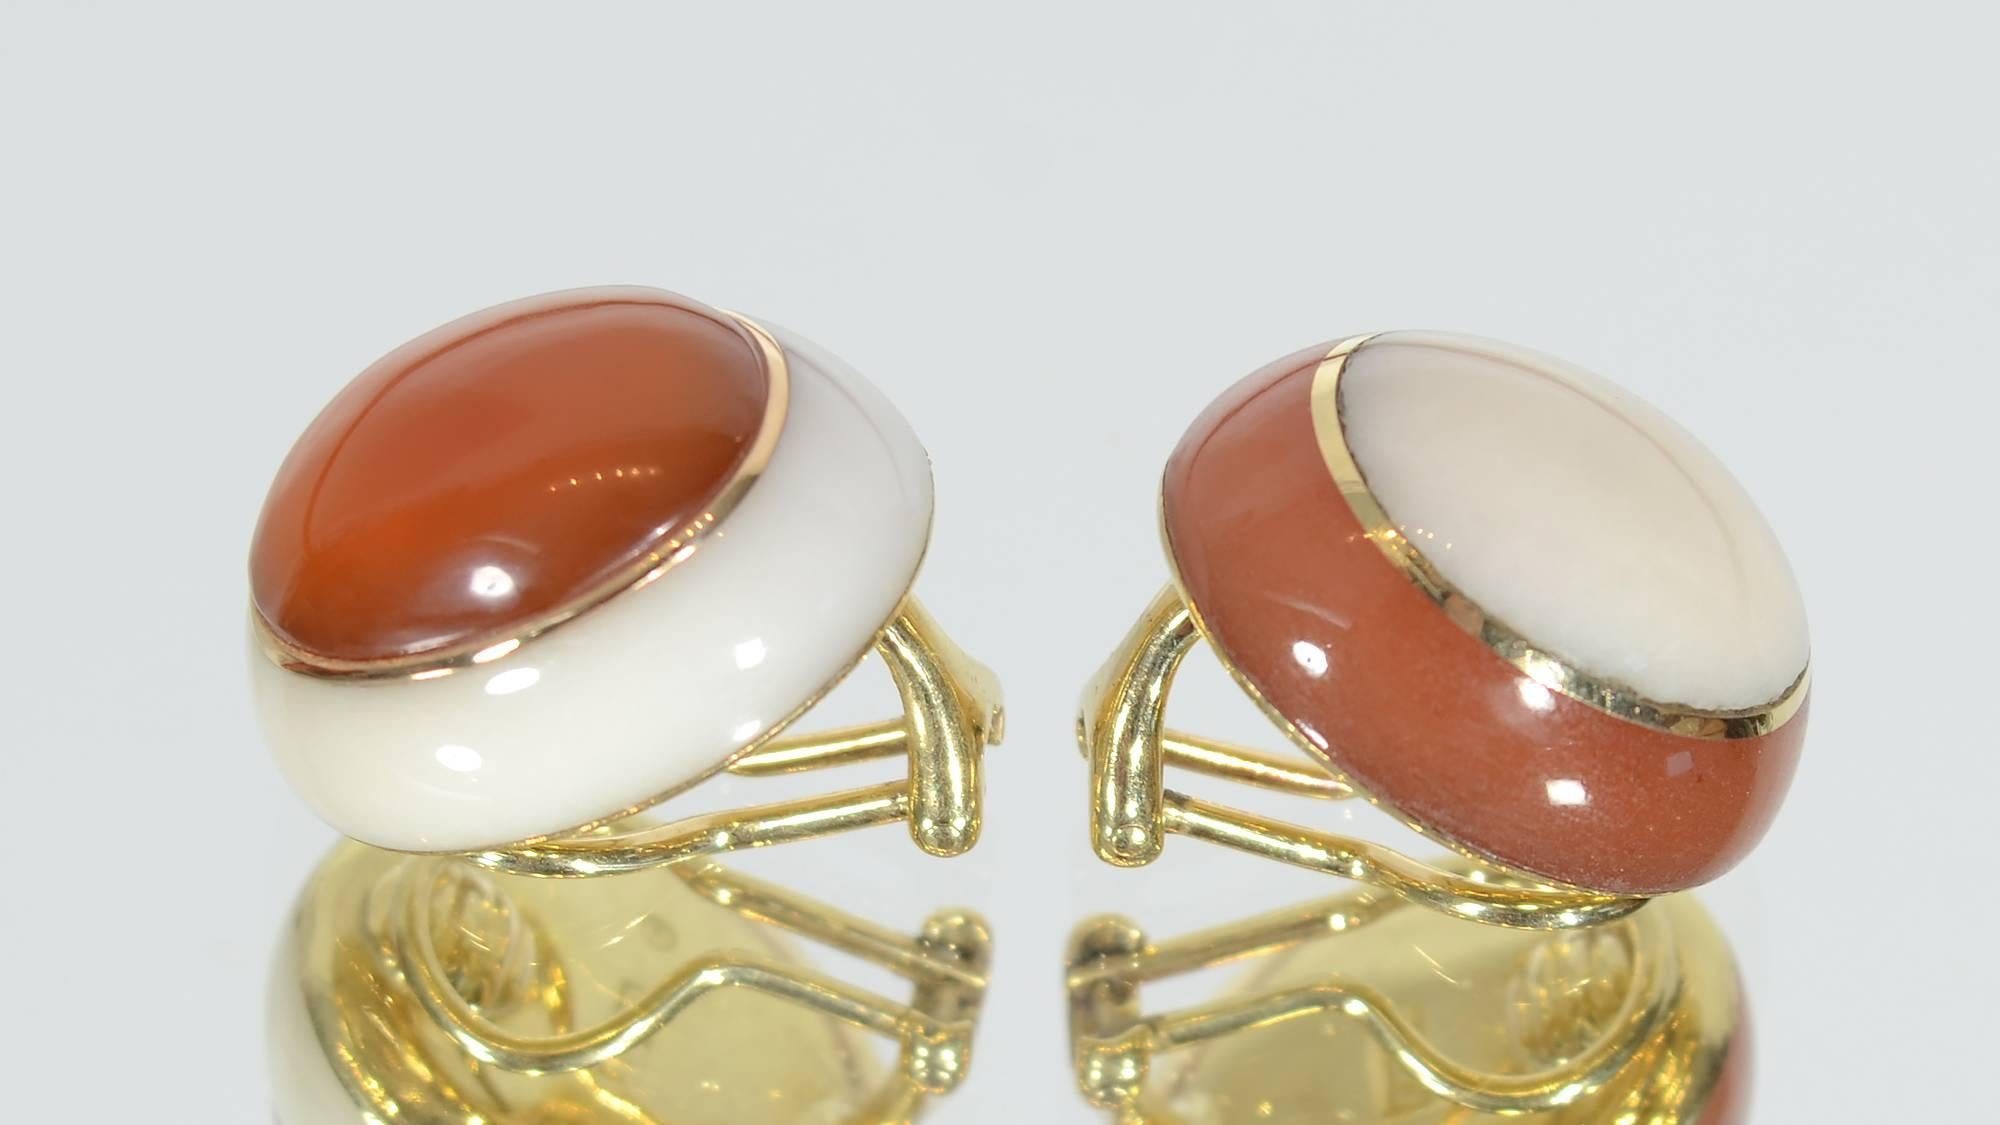 In this wonderful pair of Tiffany Yin Yang earrings, the center of one is carnelian with a white coral exterior and the reverse on the other. On both, the two different stones are separated by a gold band. Clip backs can be converted to posts.